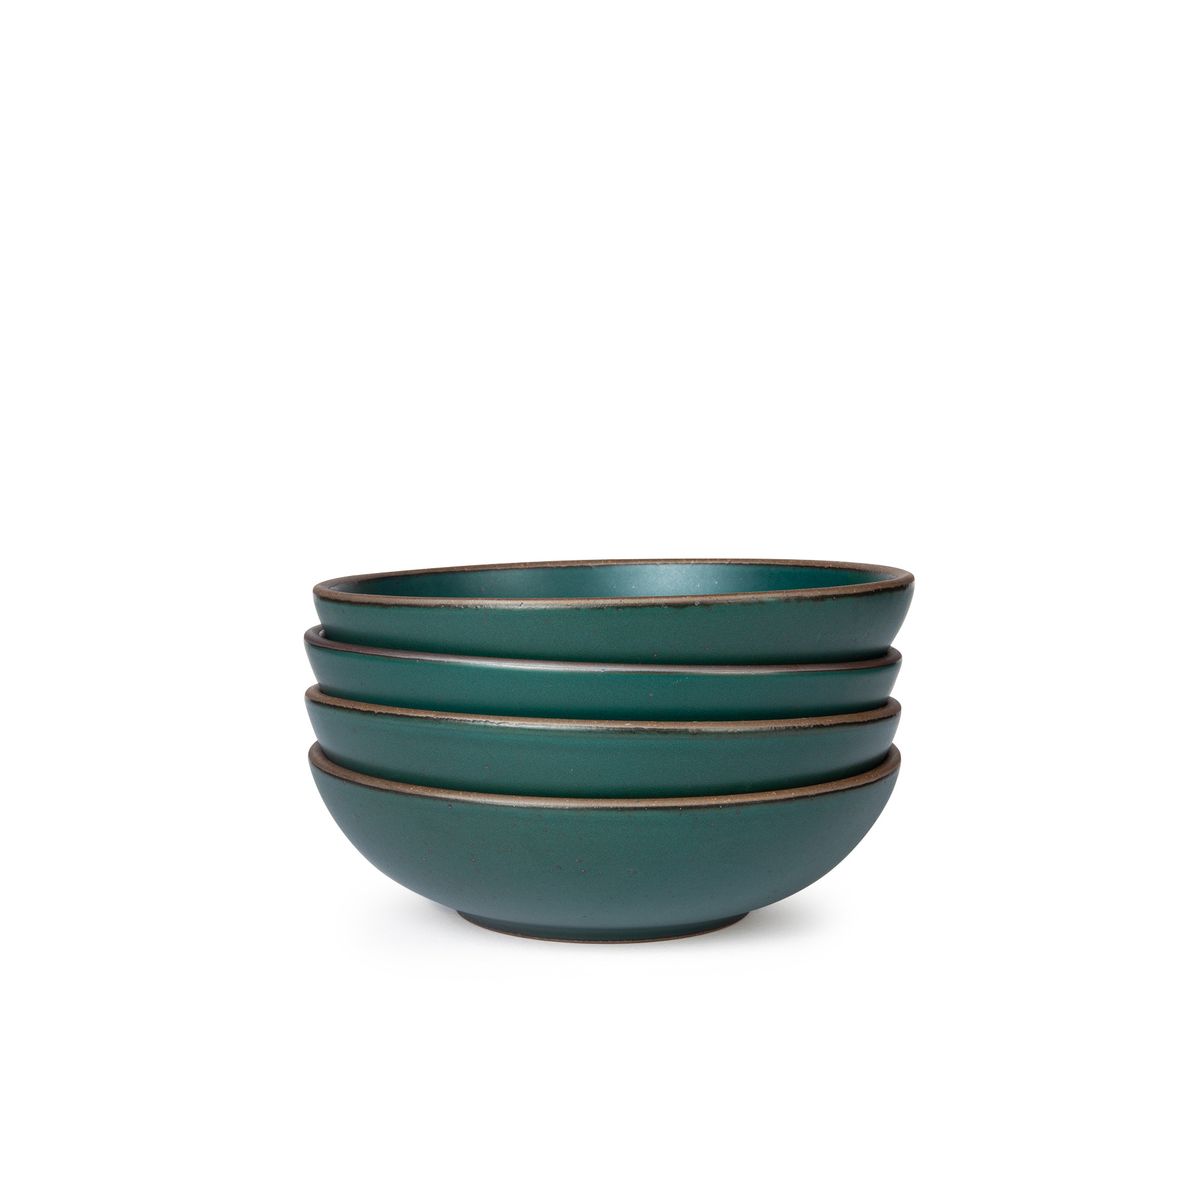 A stack of 4 dinner-sized shallow ceramic bowls in a deep dark teal color featuring iron speckles and an unglazed rim